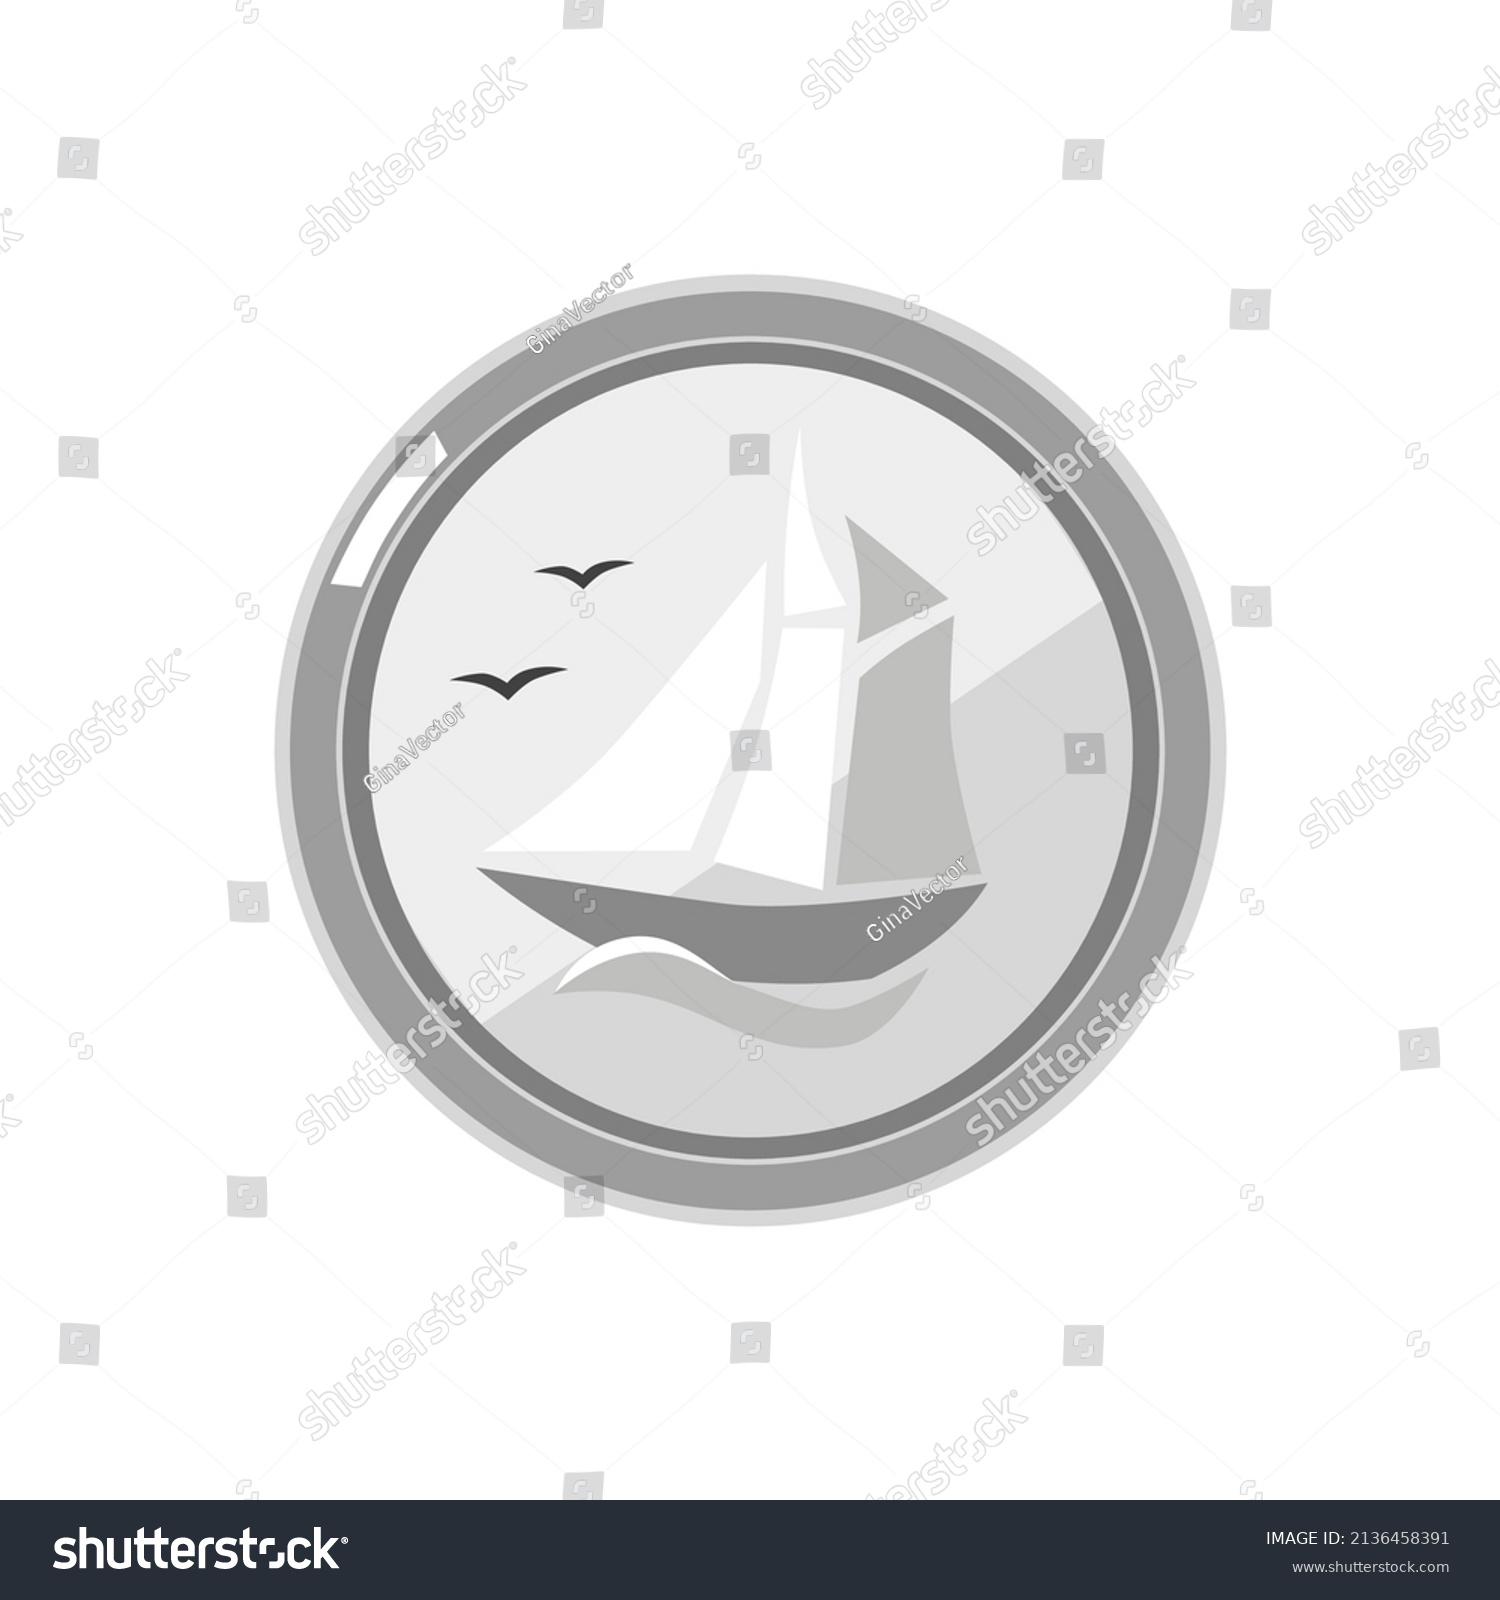 SVG of Canadian Dime. Canadian Dime with a drawing of a yacht on the back. Money, good luck symbol, business, crisis.  Vector flat illustration, cartoon style. svg